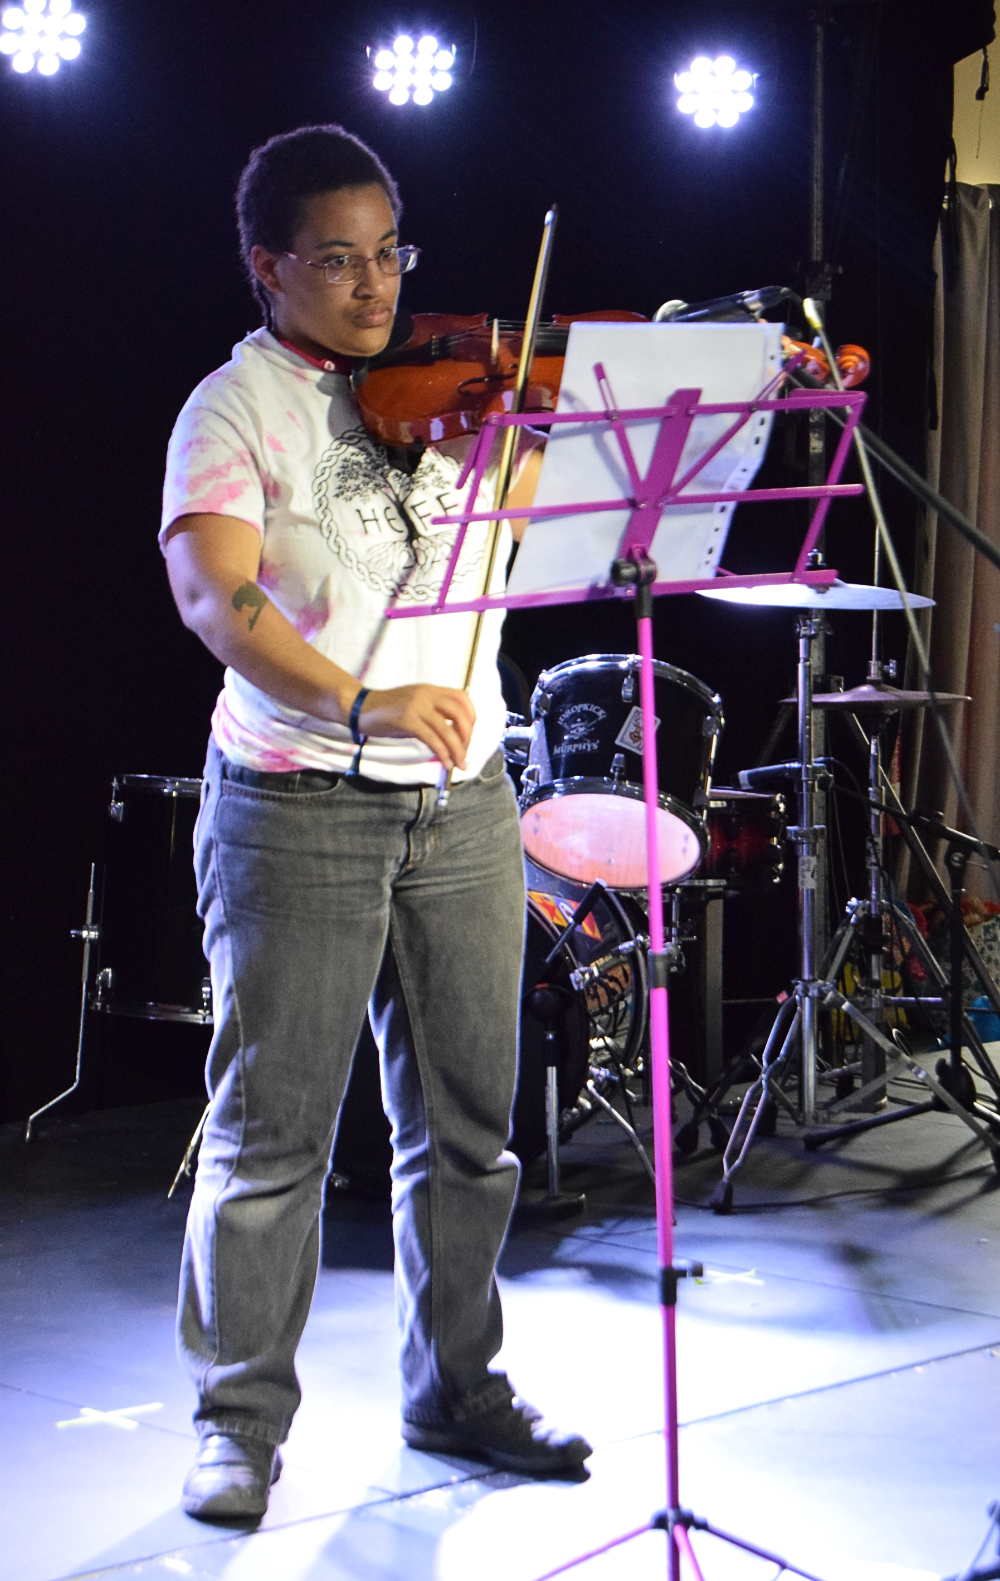 Photo of a young person playing the violin on stage